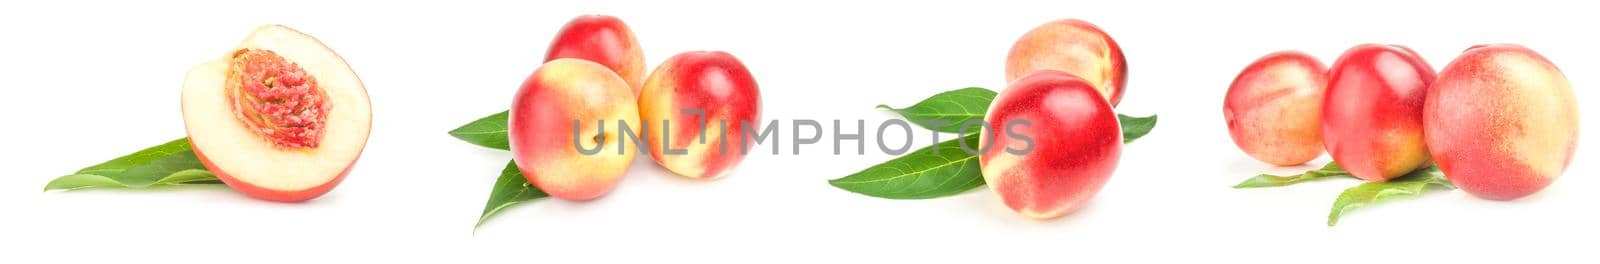 Group of ripe peaches isolated on a white background cutout by Proff